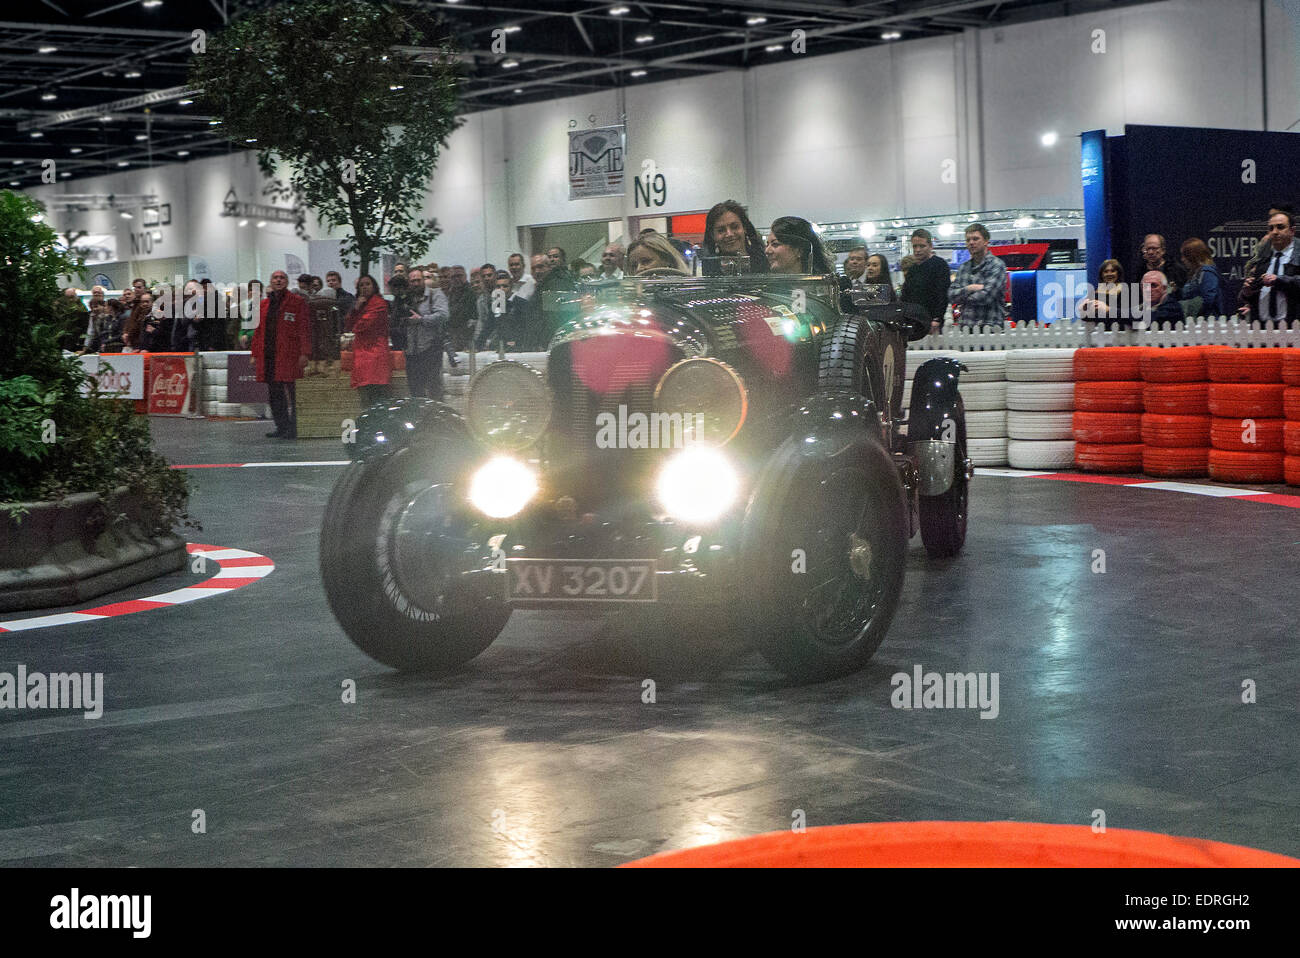 London, UK. 08th Jan, 2015. London Classic car show at Excel London. 1928 Vintage Bentley 4 1/2 Litre tourer driving in the driving display on the Grand Avenue. Credit:  Martyn Goddard/Alamy Live News Stock Photo